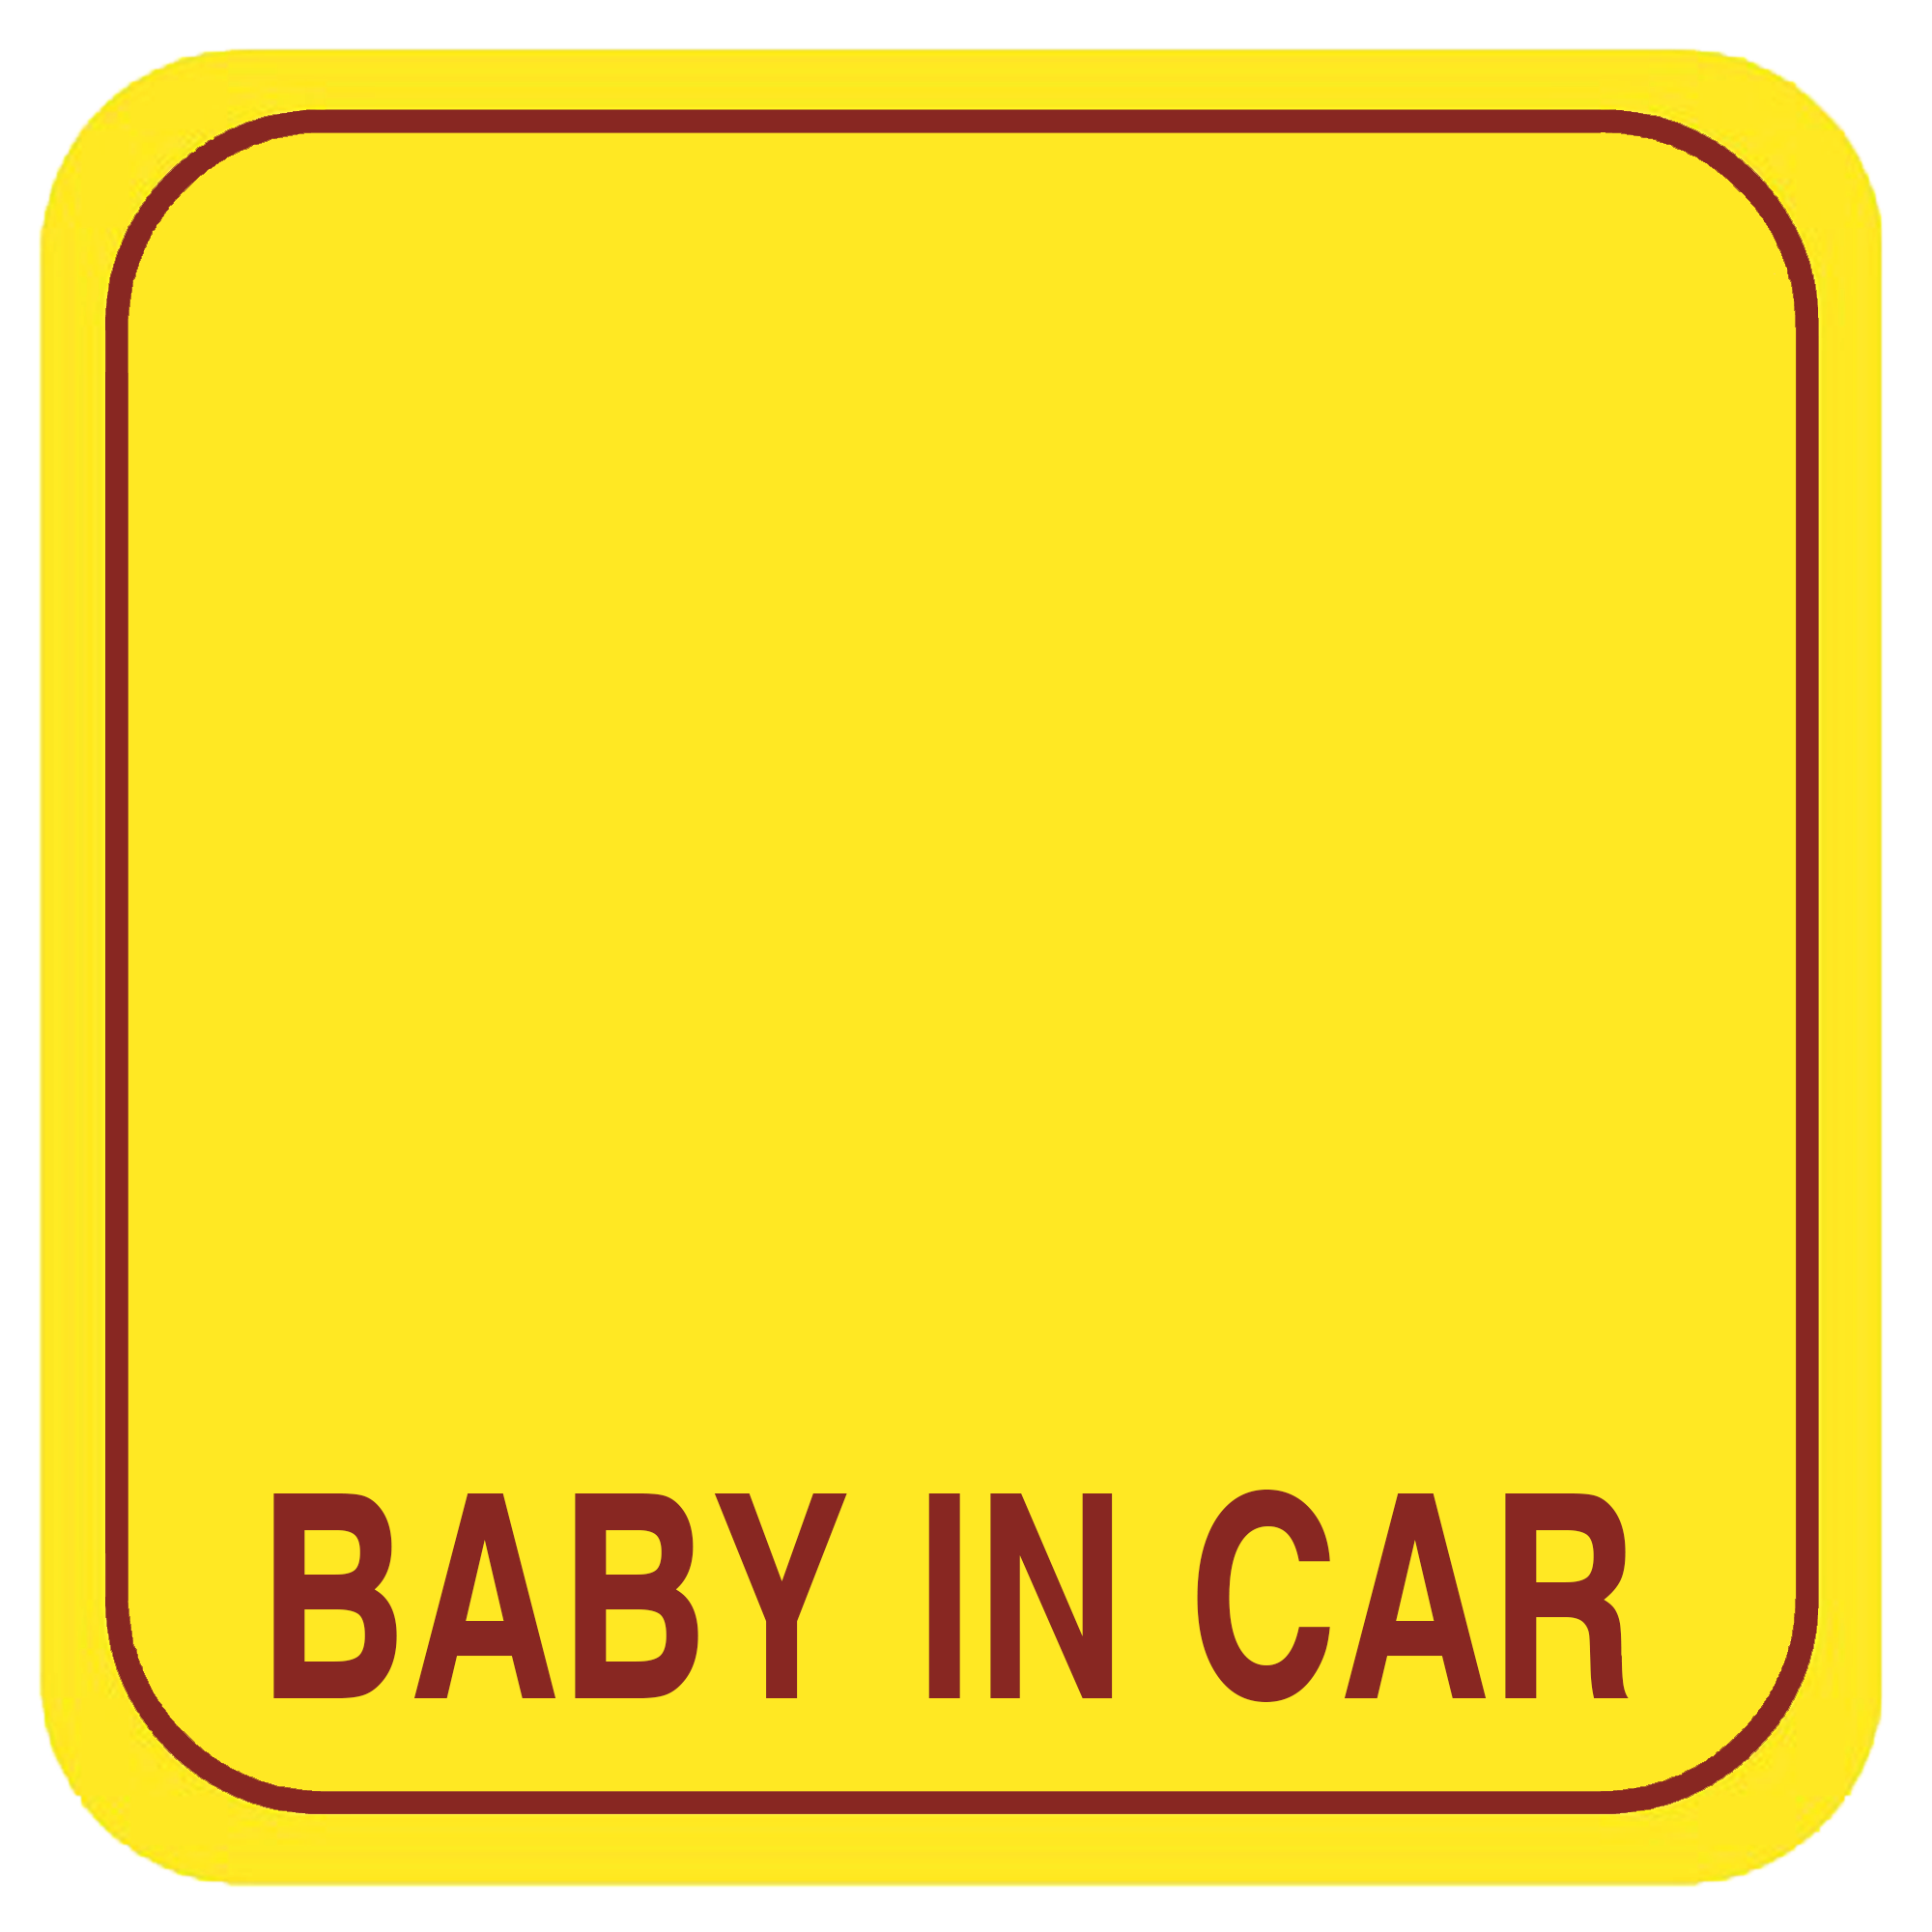 PTN12 Personalised BABY ON BOARD BABY IN CAR Safety Sticker Car Vinyl Stickers Decals Accessories